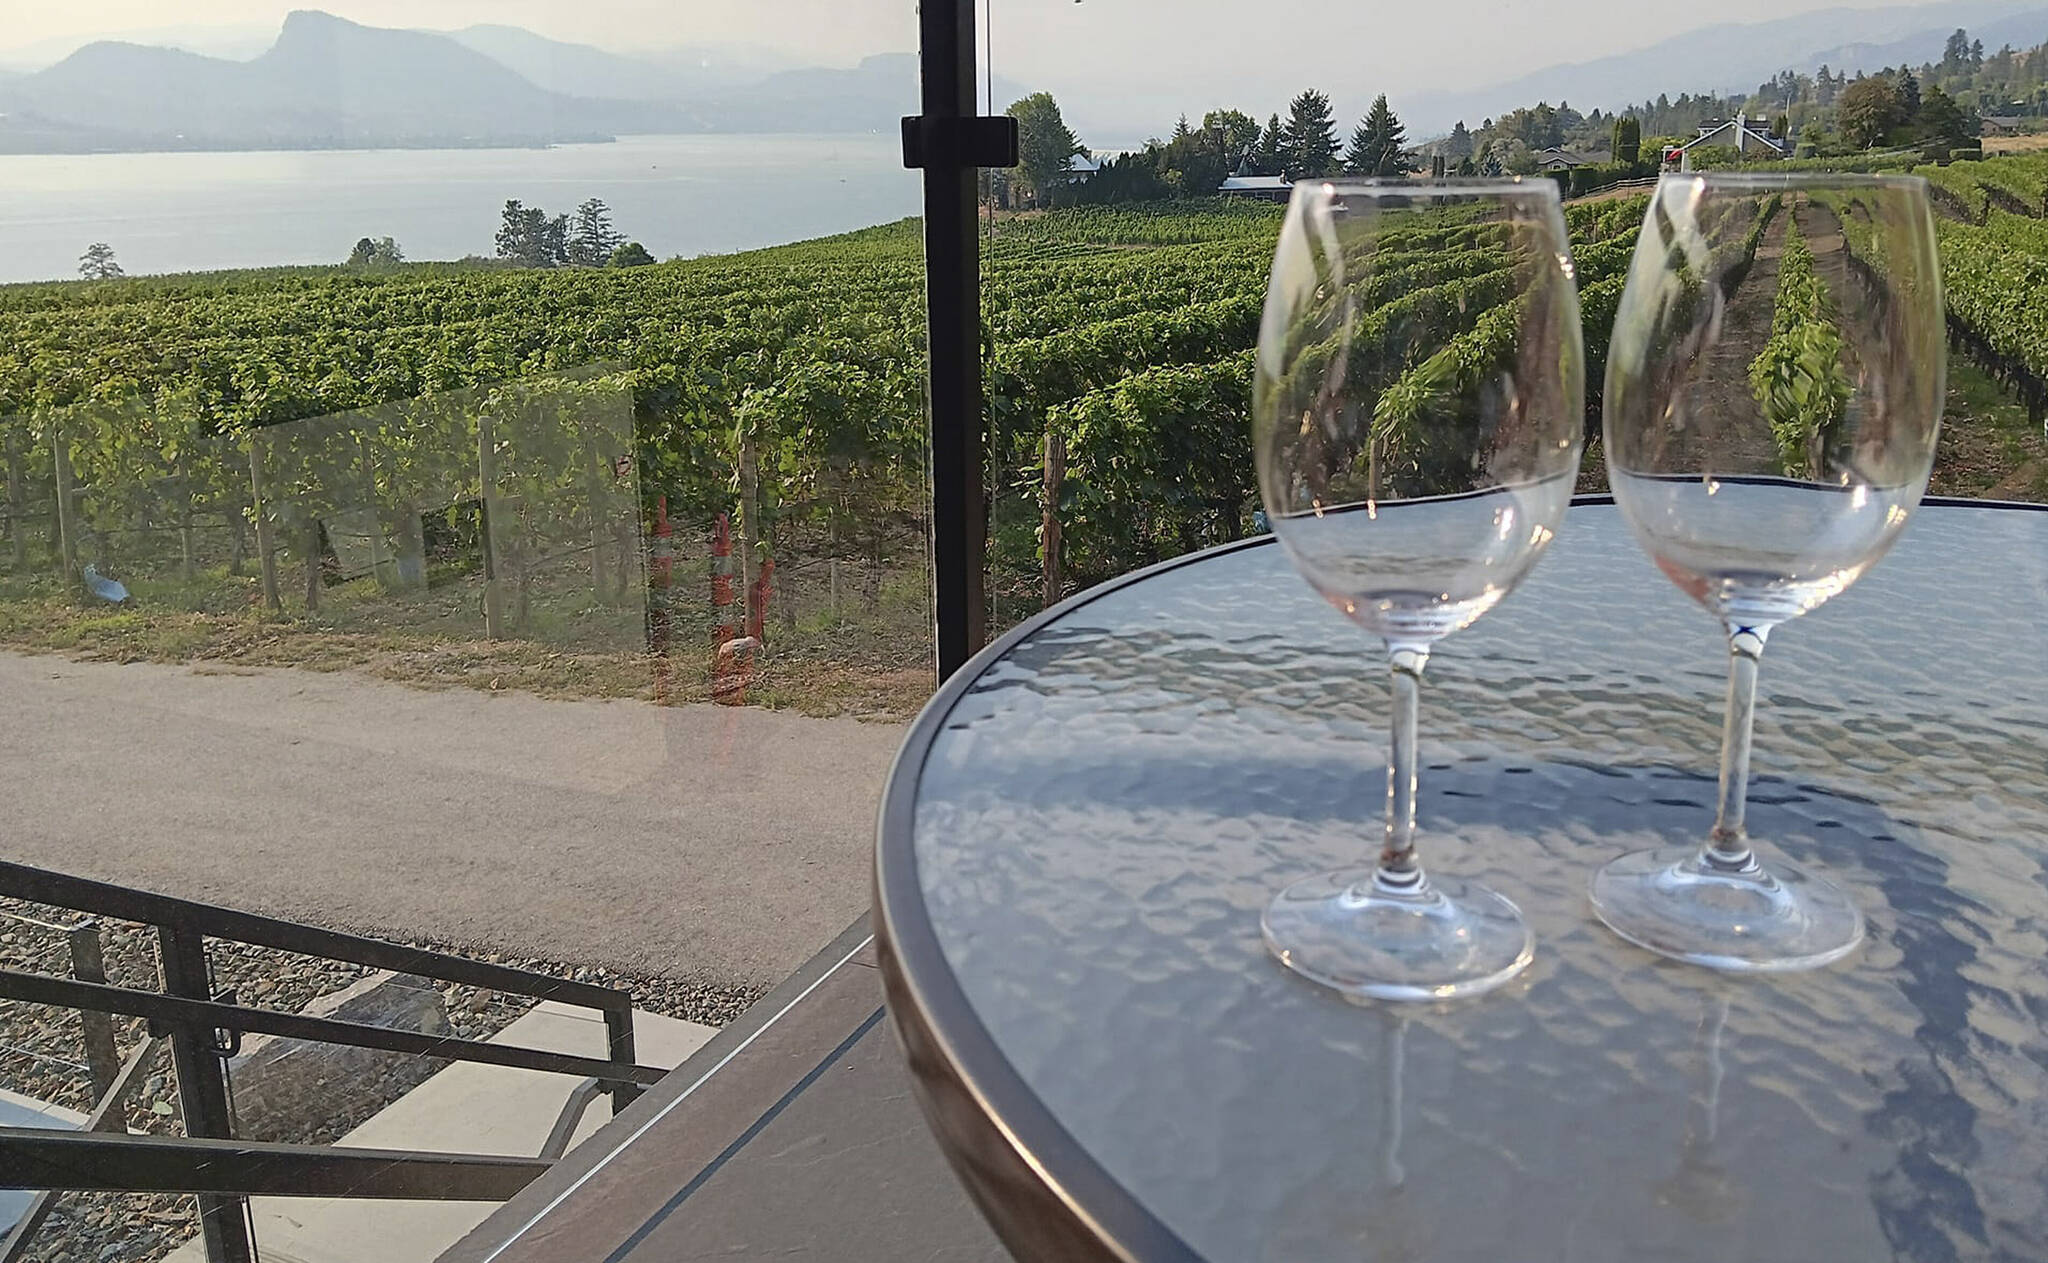 Many of the wineries in Penticton offer great views of the lakes.